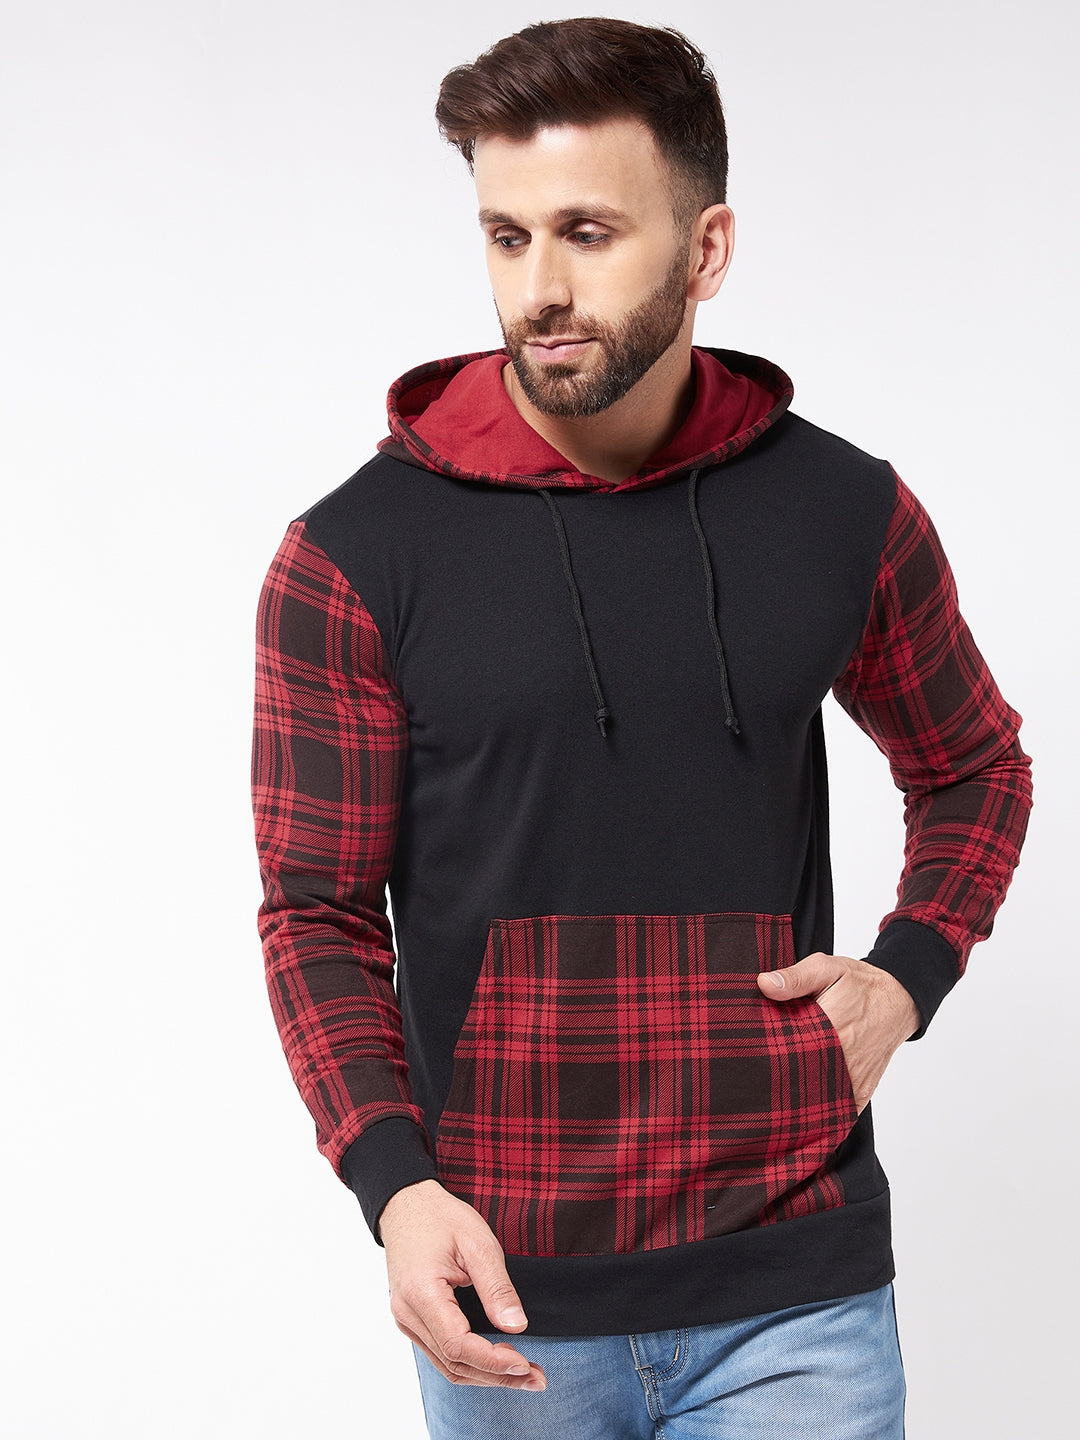 Black and Red Hooded Full Sleeve  Tshirt